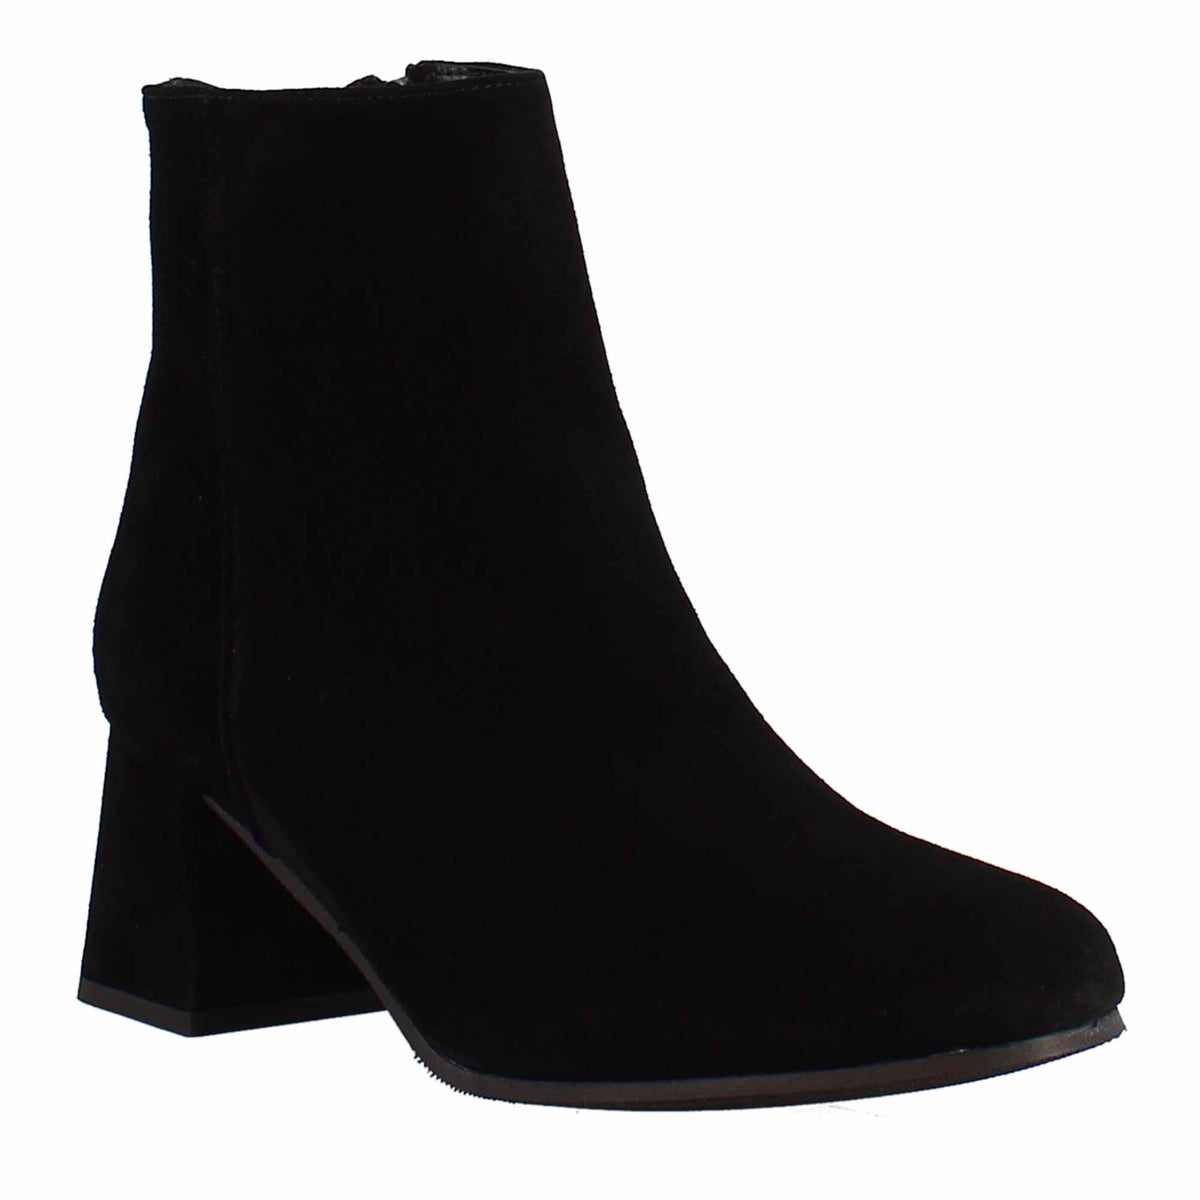 Handmade women's ankle boots in black suede 